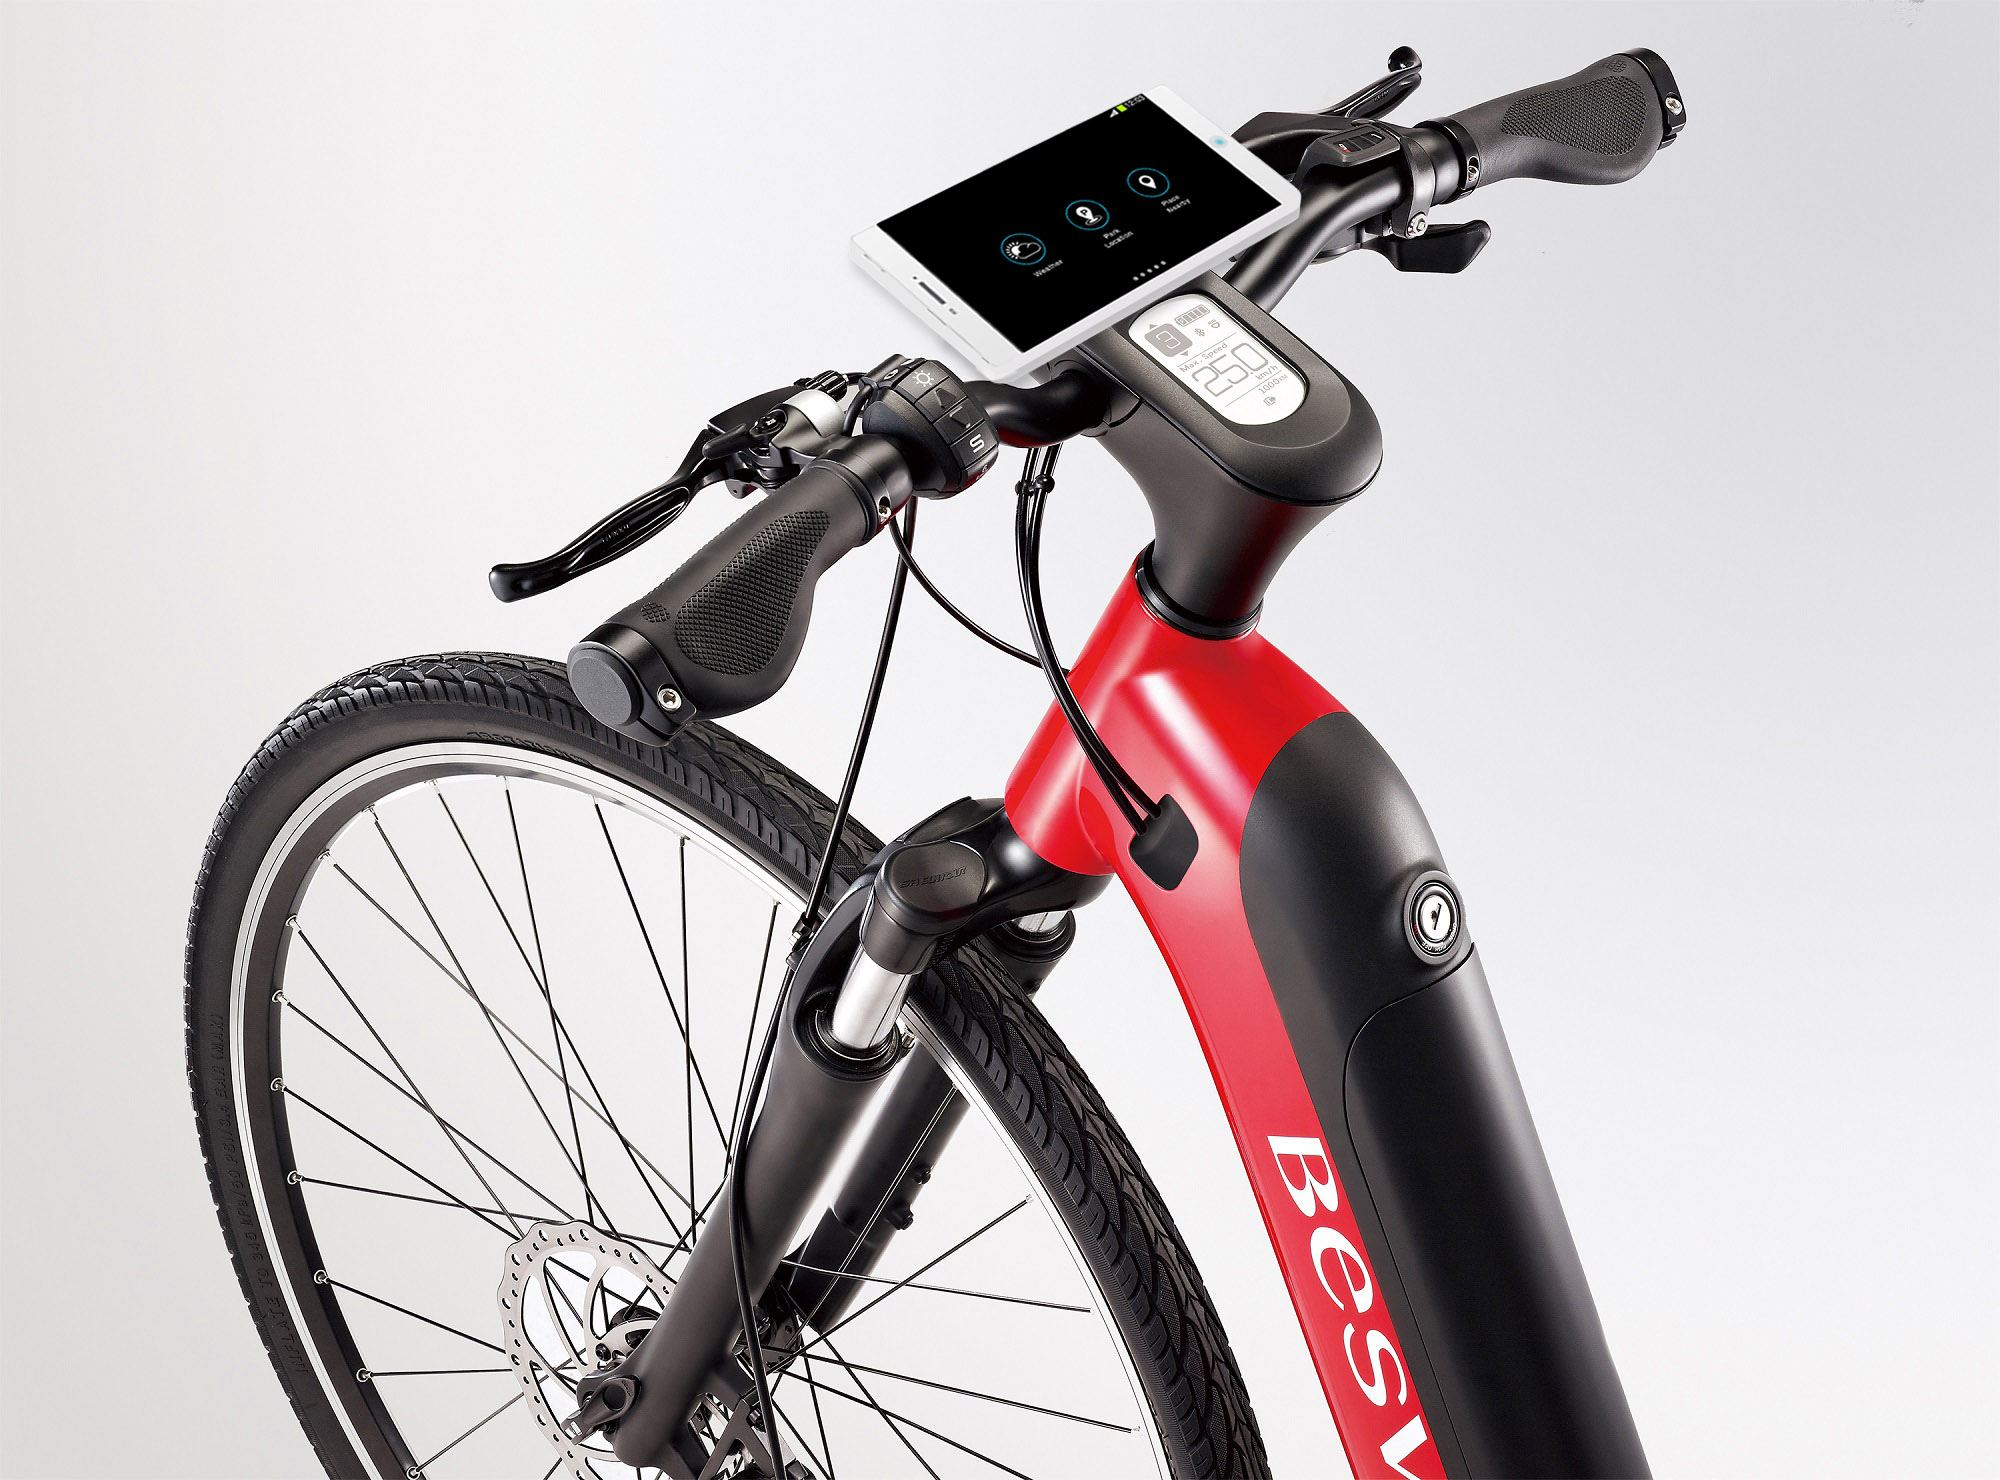 BESV News & Events | Experience Smart e-Biking with the BESV Smart App